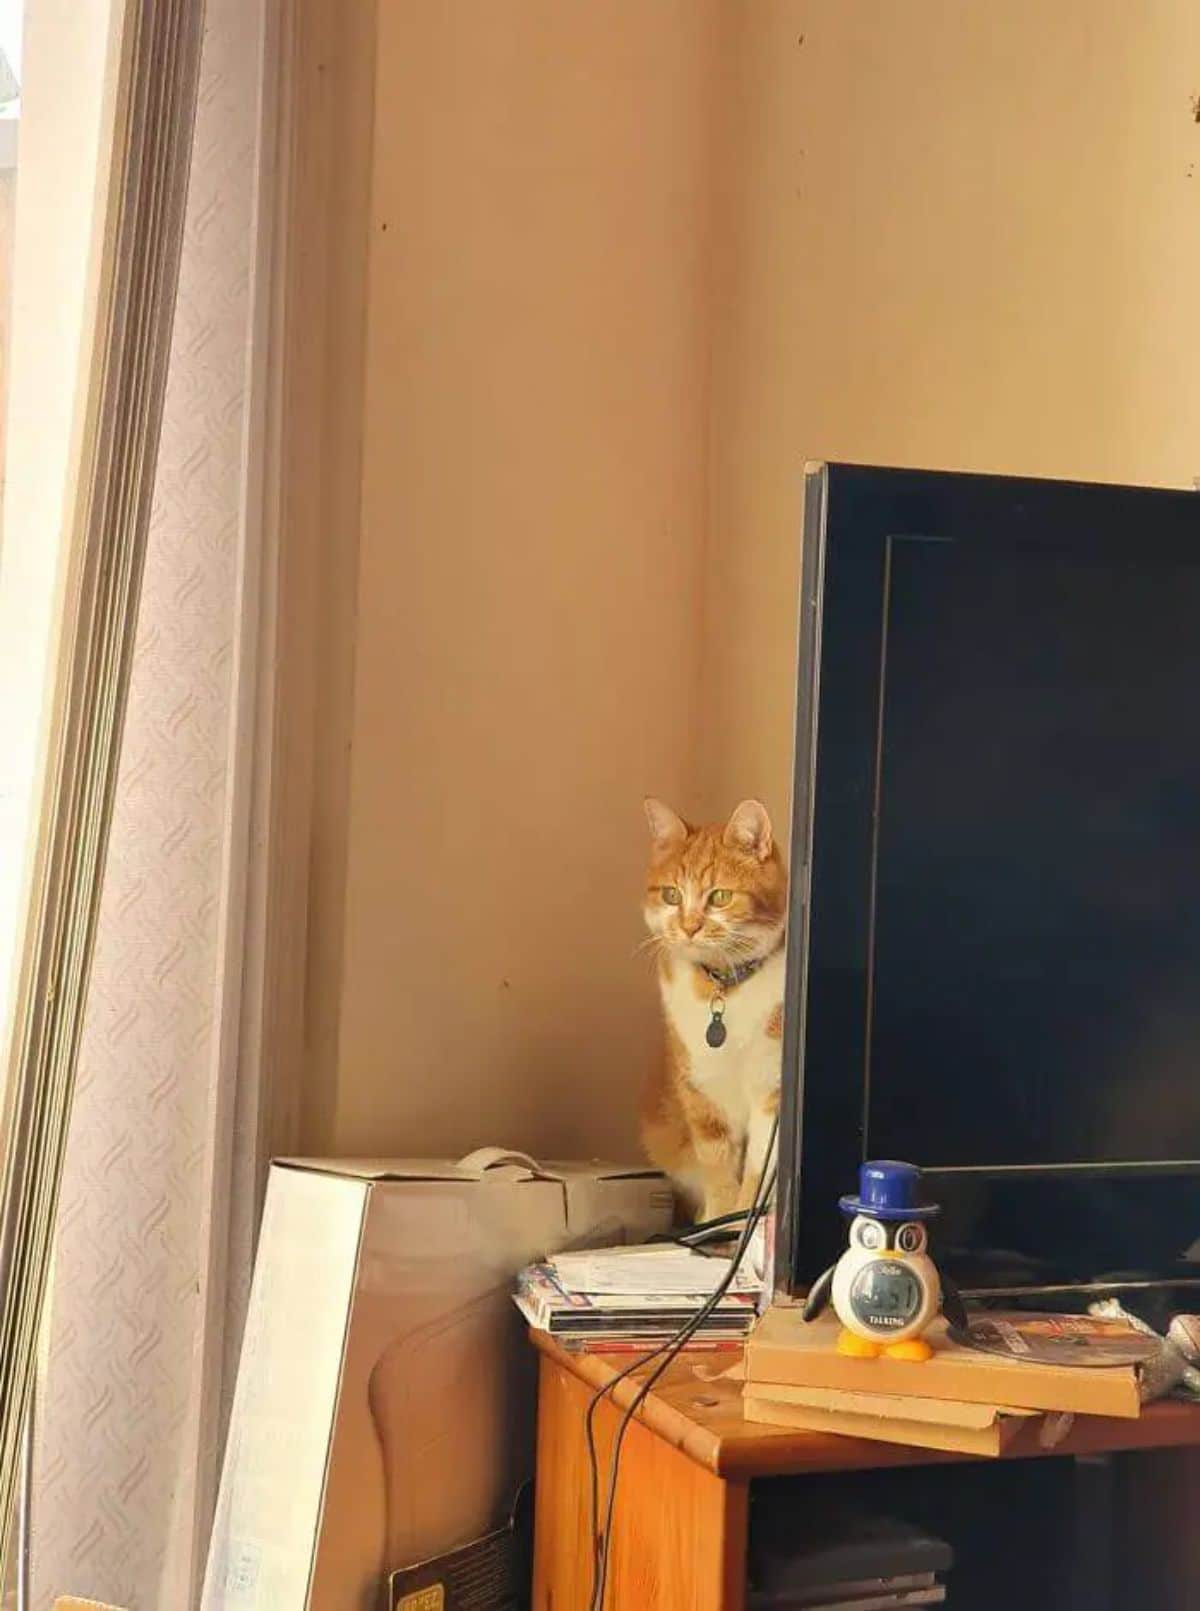 orange and white cat sitting on a table full of things behind a black television